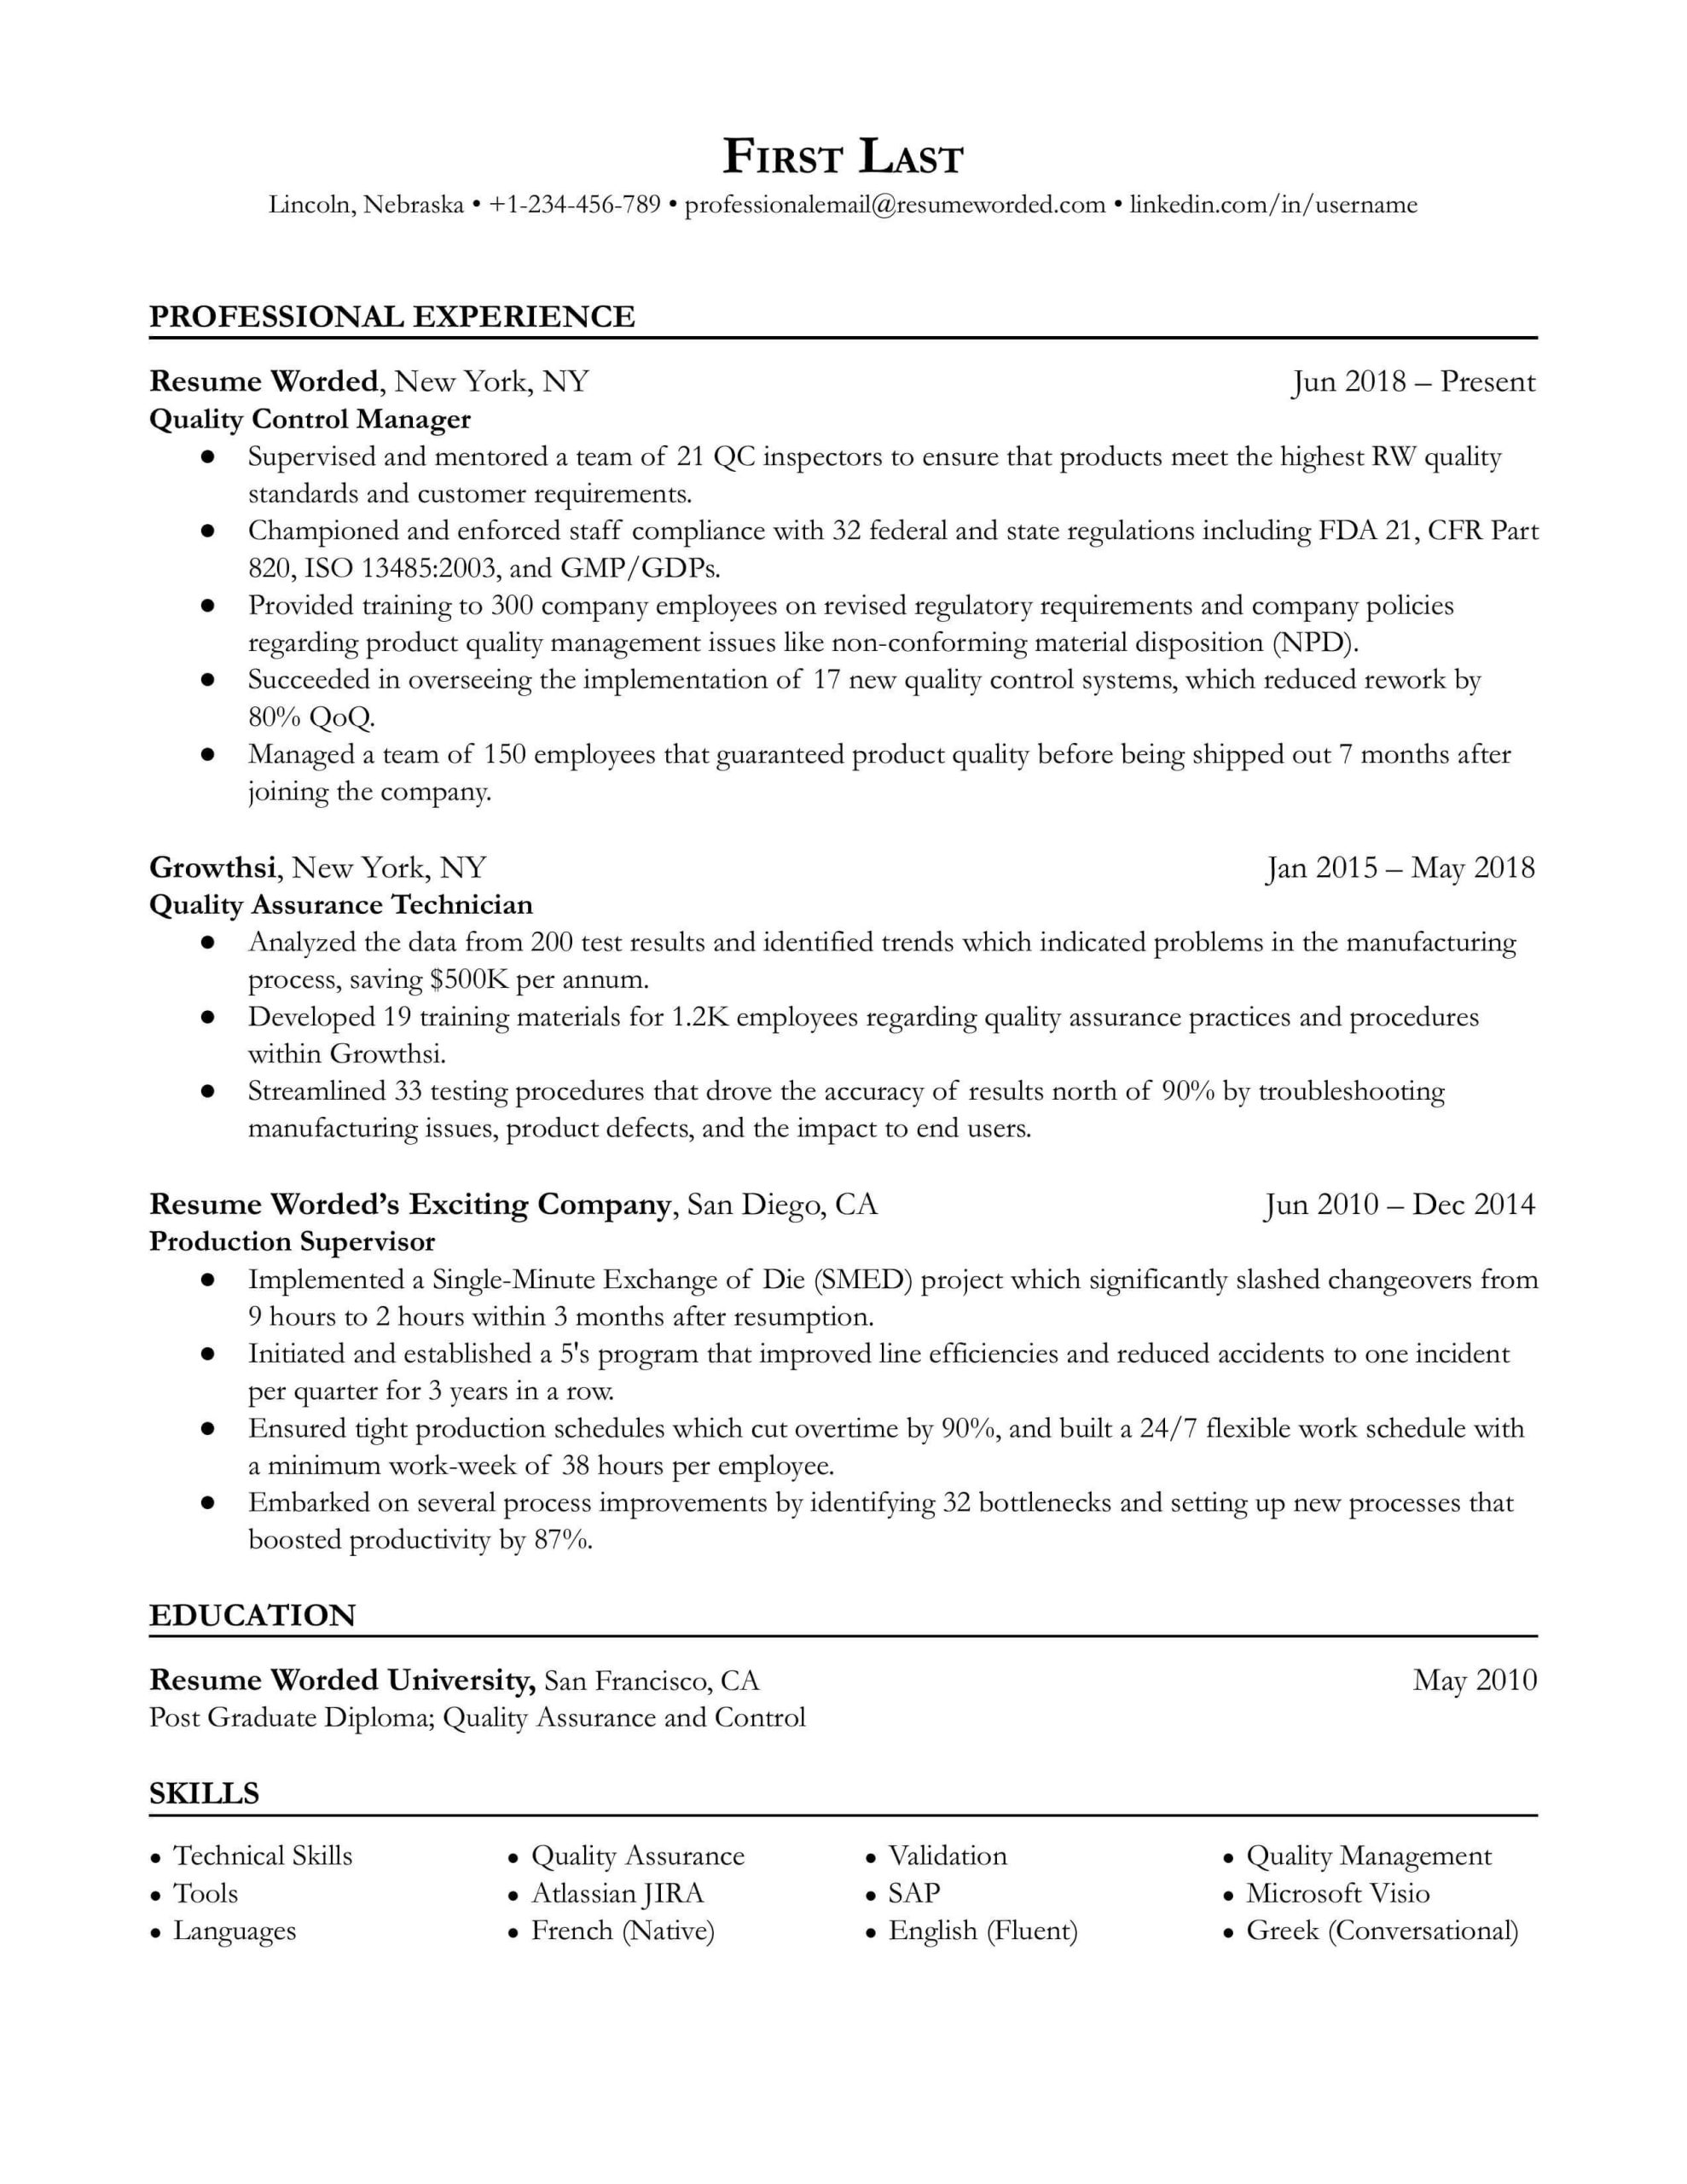 Sample Resume for Quality Control Chemist Quality Control Manager Resume Example for 2022 Resume Worded